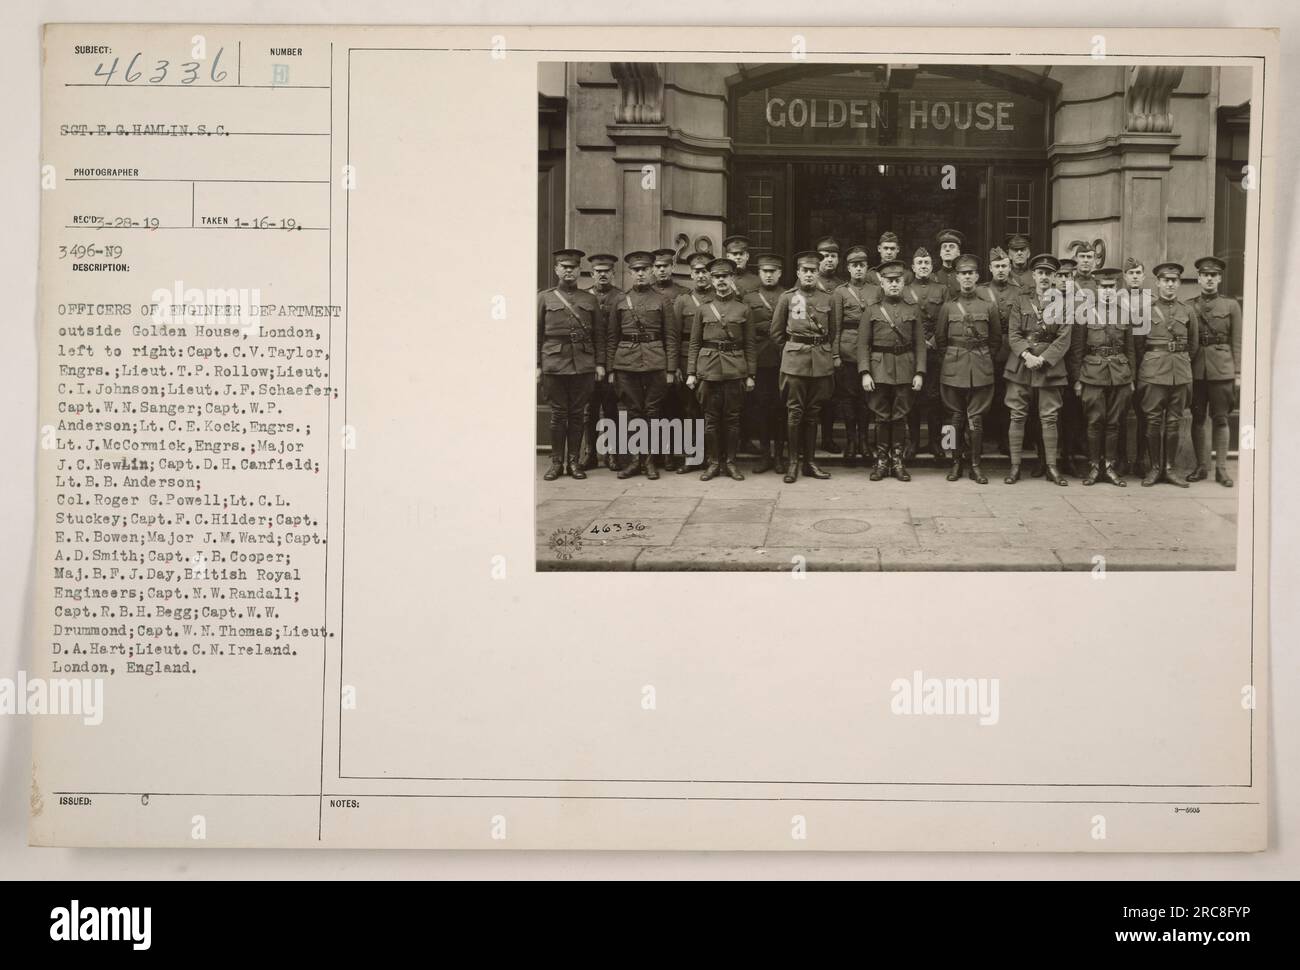 Officers of the Engineer Department are seen outside the Golden House in London. The image was taken on January 16, 1919. The officers, from left to right, are: Captain C.V. Taylor, Lieutenant T.P. Rollow, Lieutenant C.I. Johnson, Lieutenant J. F. Schaefer, Captain W. N. Sanger, Captain W. P. Anderson, Lieutenant C. E. Kock, Lieutenant J. McCormick, Major J.C. Newlin, Captain D. H. Canfield, Lieutenant B. B. Anderson, Colonel Roger G. Powell, Lieutenant C. L. Stuckey, Captain F. C. Hilder, Captain E. R. Bowen, Major J.M. Ward, Captain A.D. Smith, Captain J. B. Cooper, Major B.P.J.Day of the Br Stock Photo